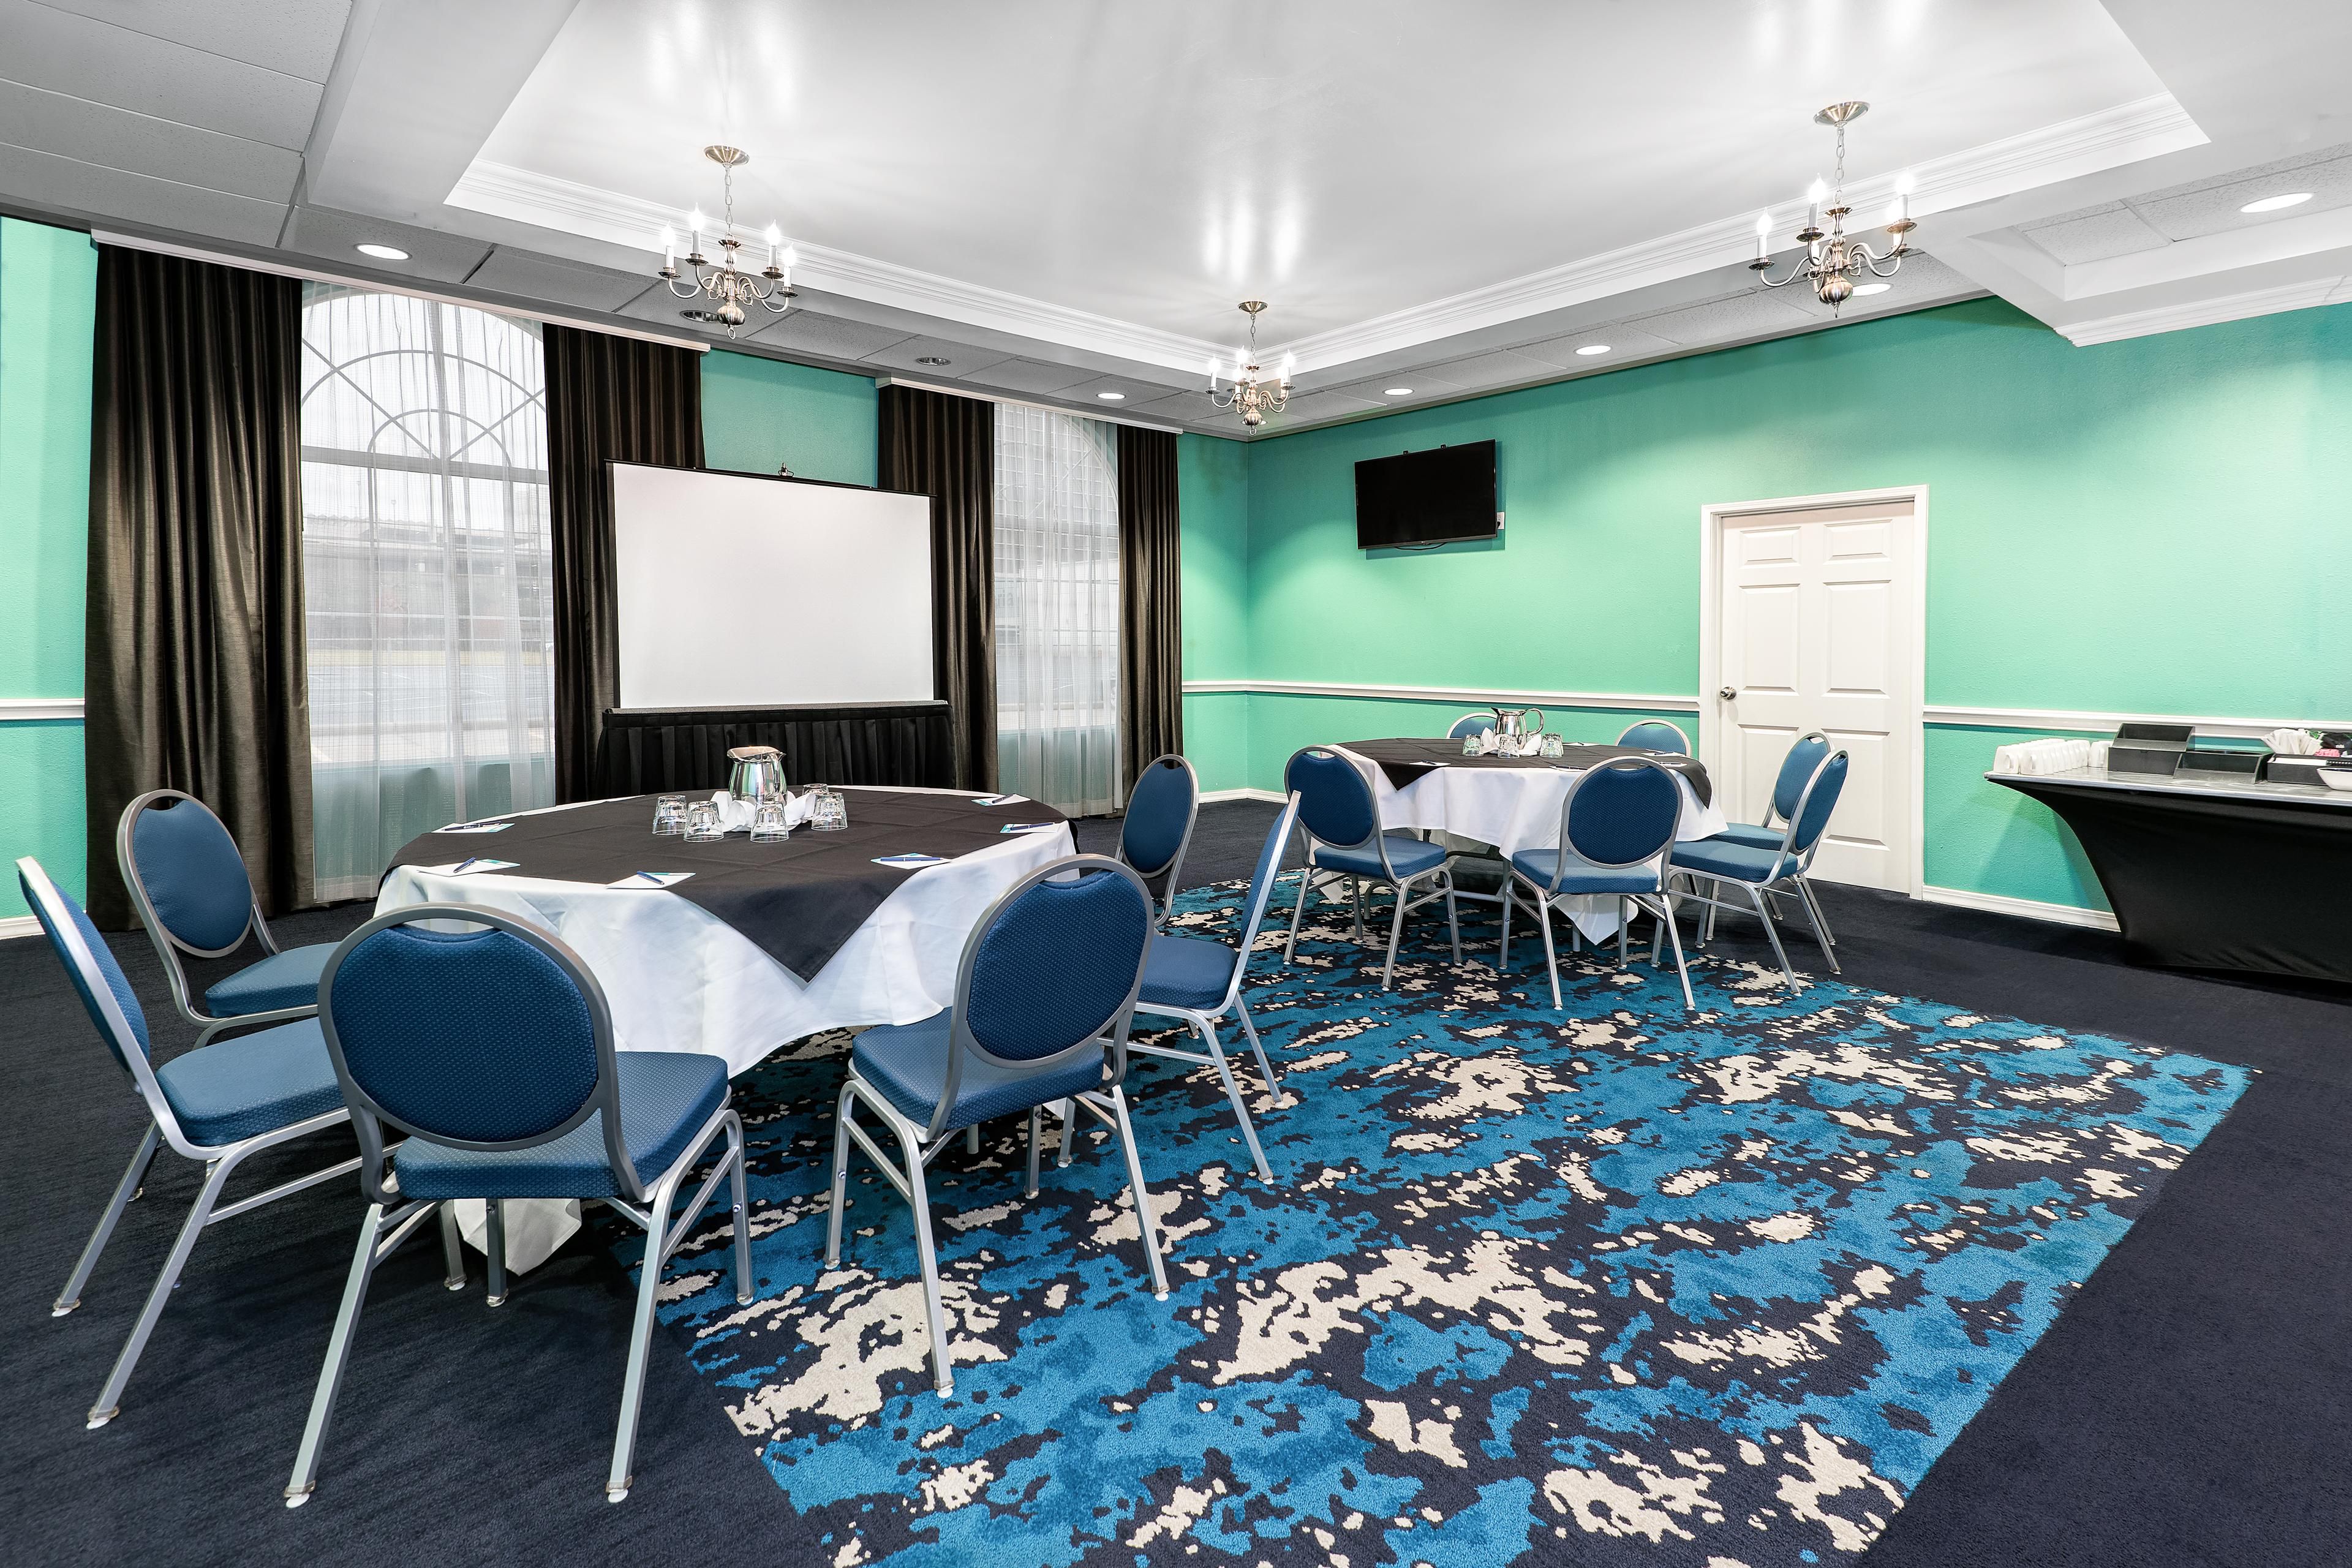 Make it a Hotel Indigo event or meeting. We offer flexible event space across 4 distinctive rooms for meetings, presentations, receptions and more, for 12 to 115 people. Call 713-621-8988 to speak with our Event Specialist to book!